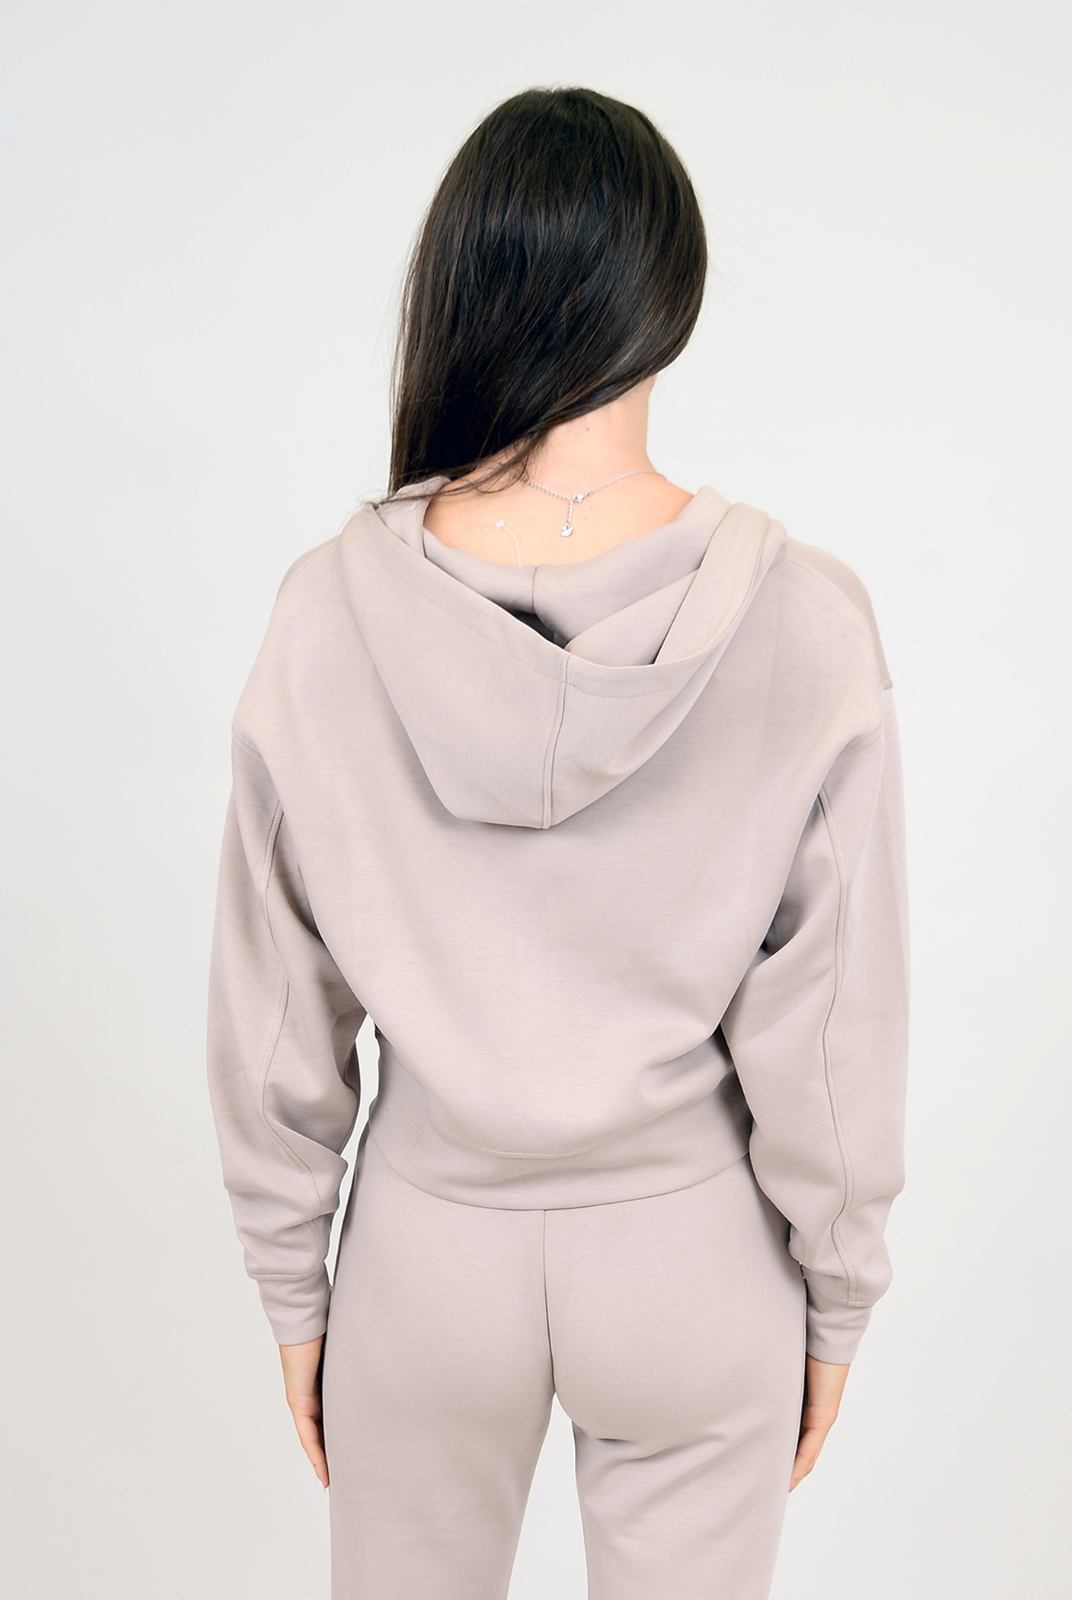 Haidelyn Soft Scuba LS - Taupe. This scuba fabric is oh so comfy! A must have staple piece for your wardrobe, sweater is cropped but a perfect pair to the Senza Soft Scuba Shorts!